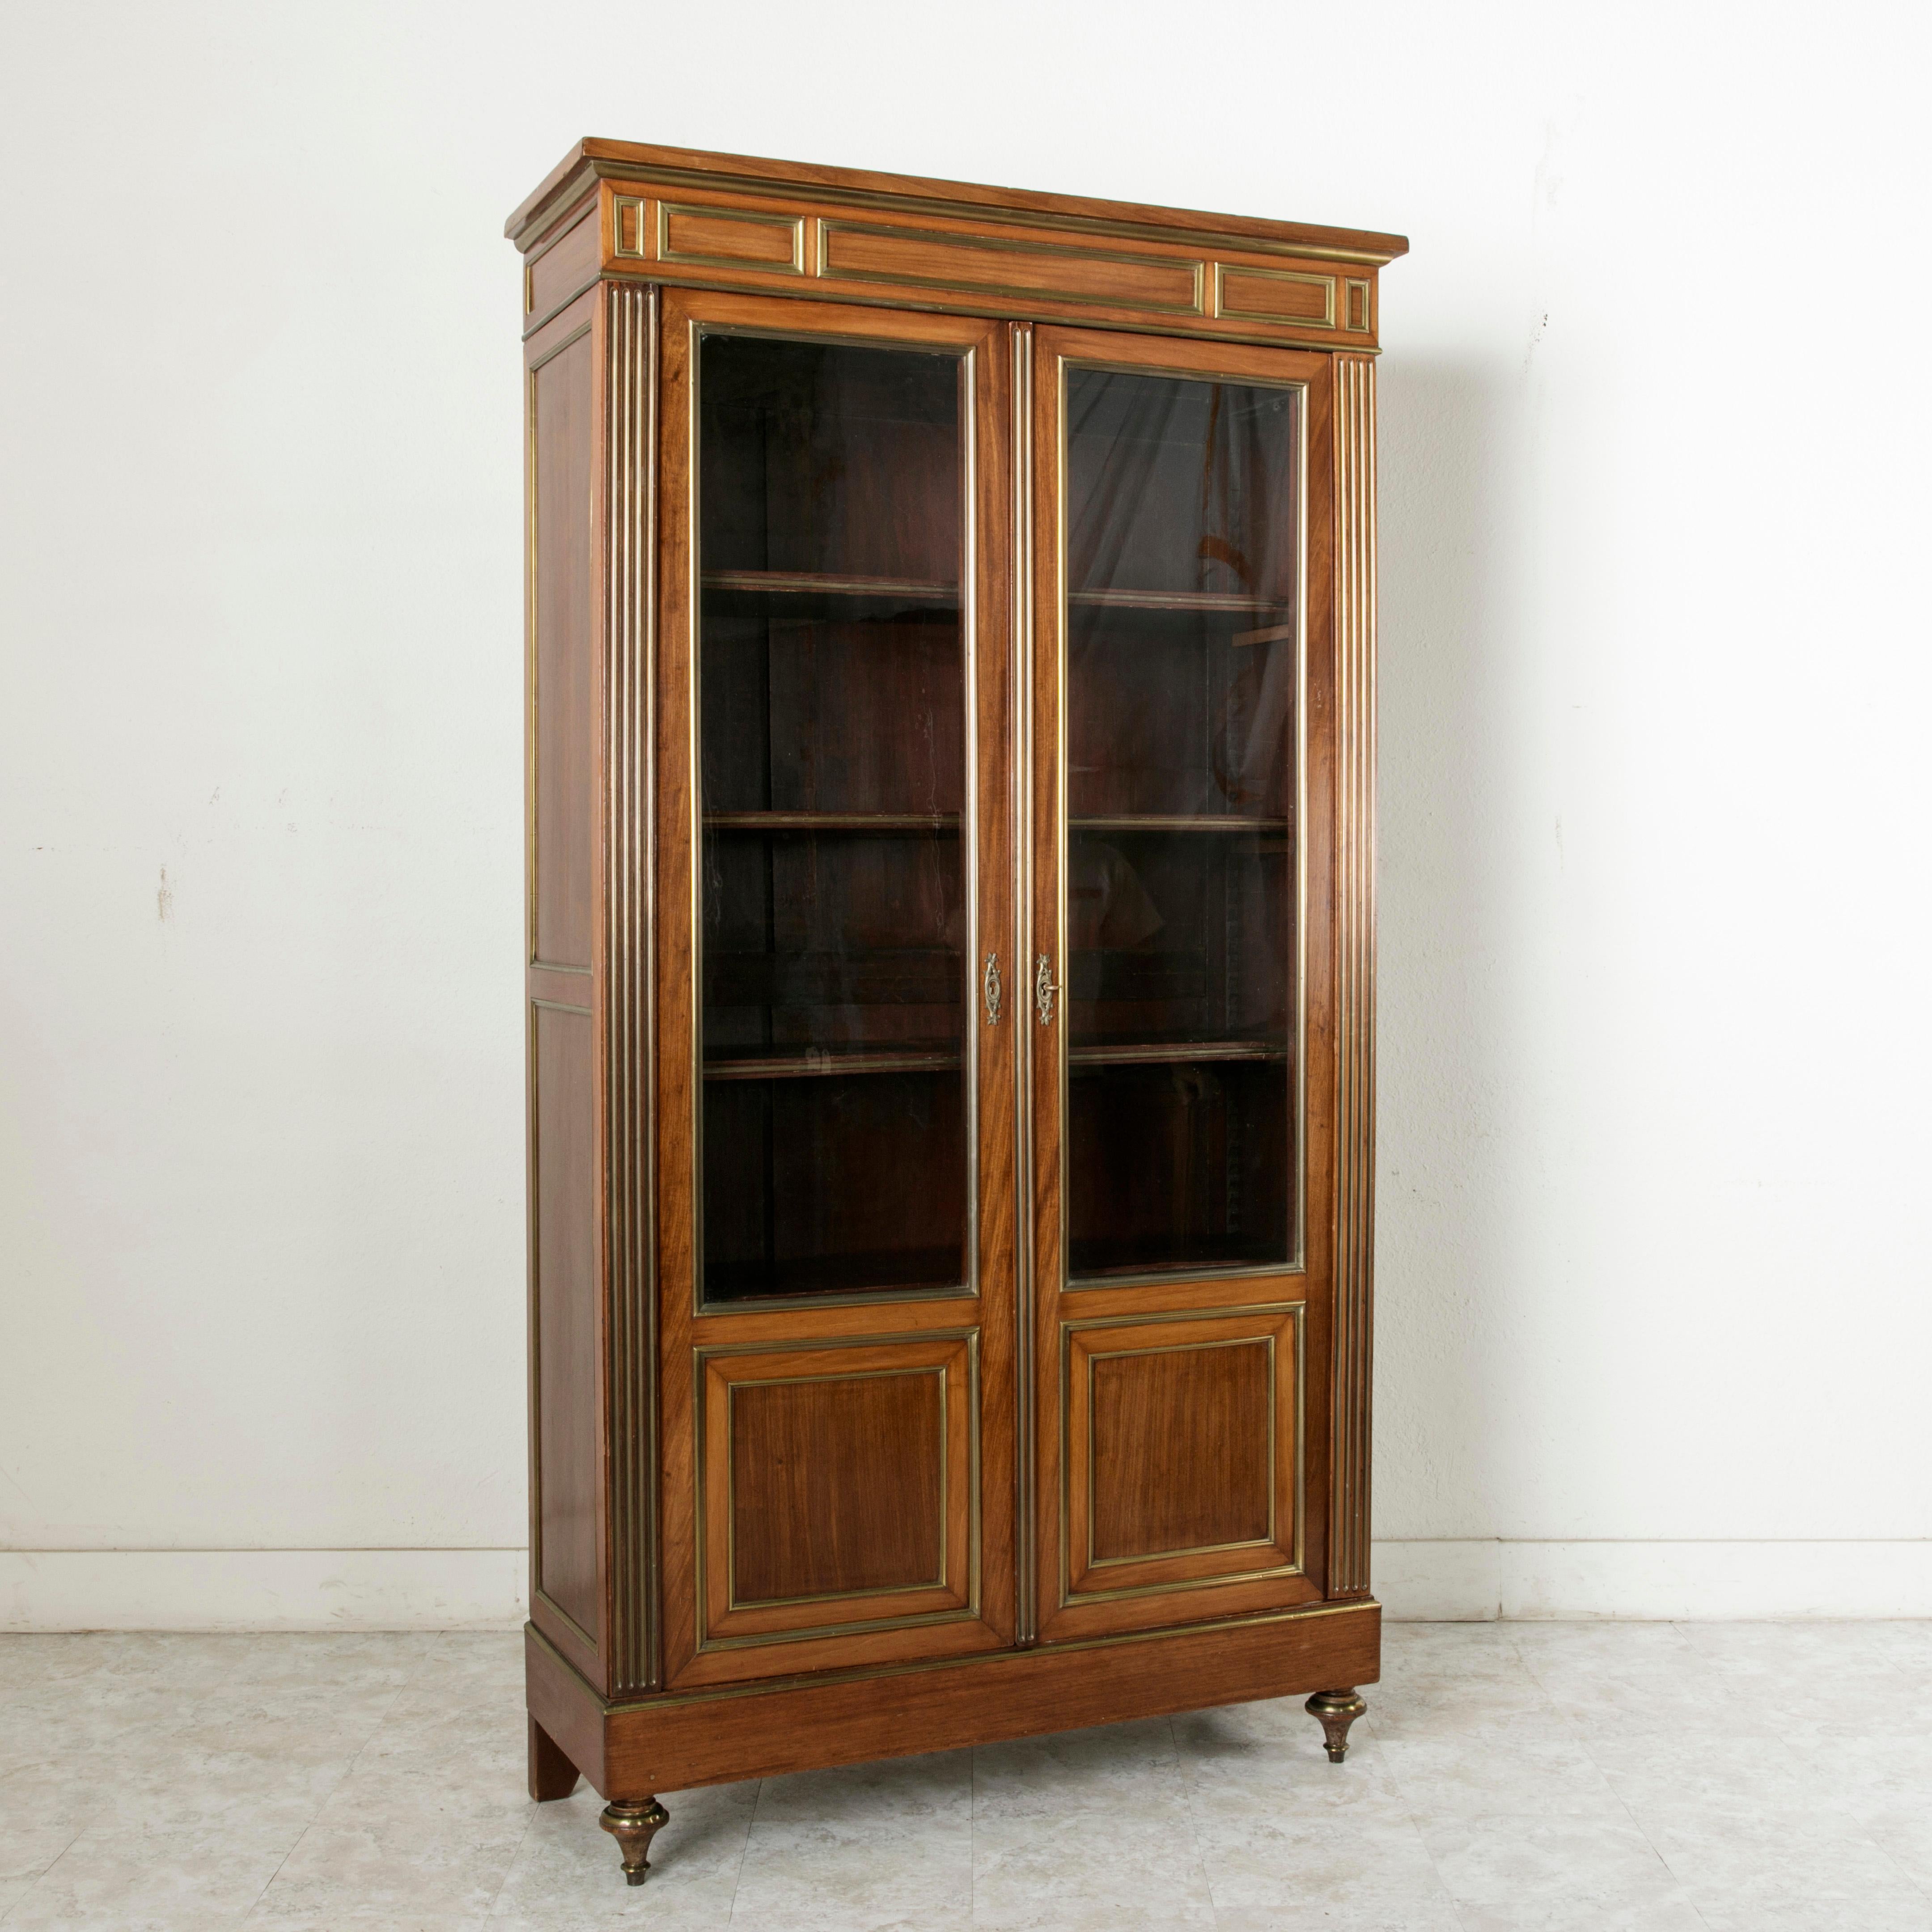 This striking 19th century Louis XVI style mahogany bibliotheque or bookcase is finished with stunning bronze banding. Its corners feature fluting with inset bronze filets. Both doors have their original blown glass, evidenced by waves and an